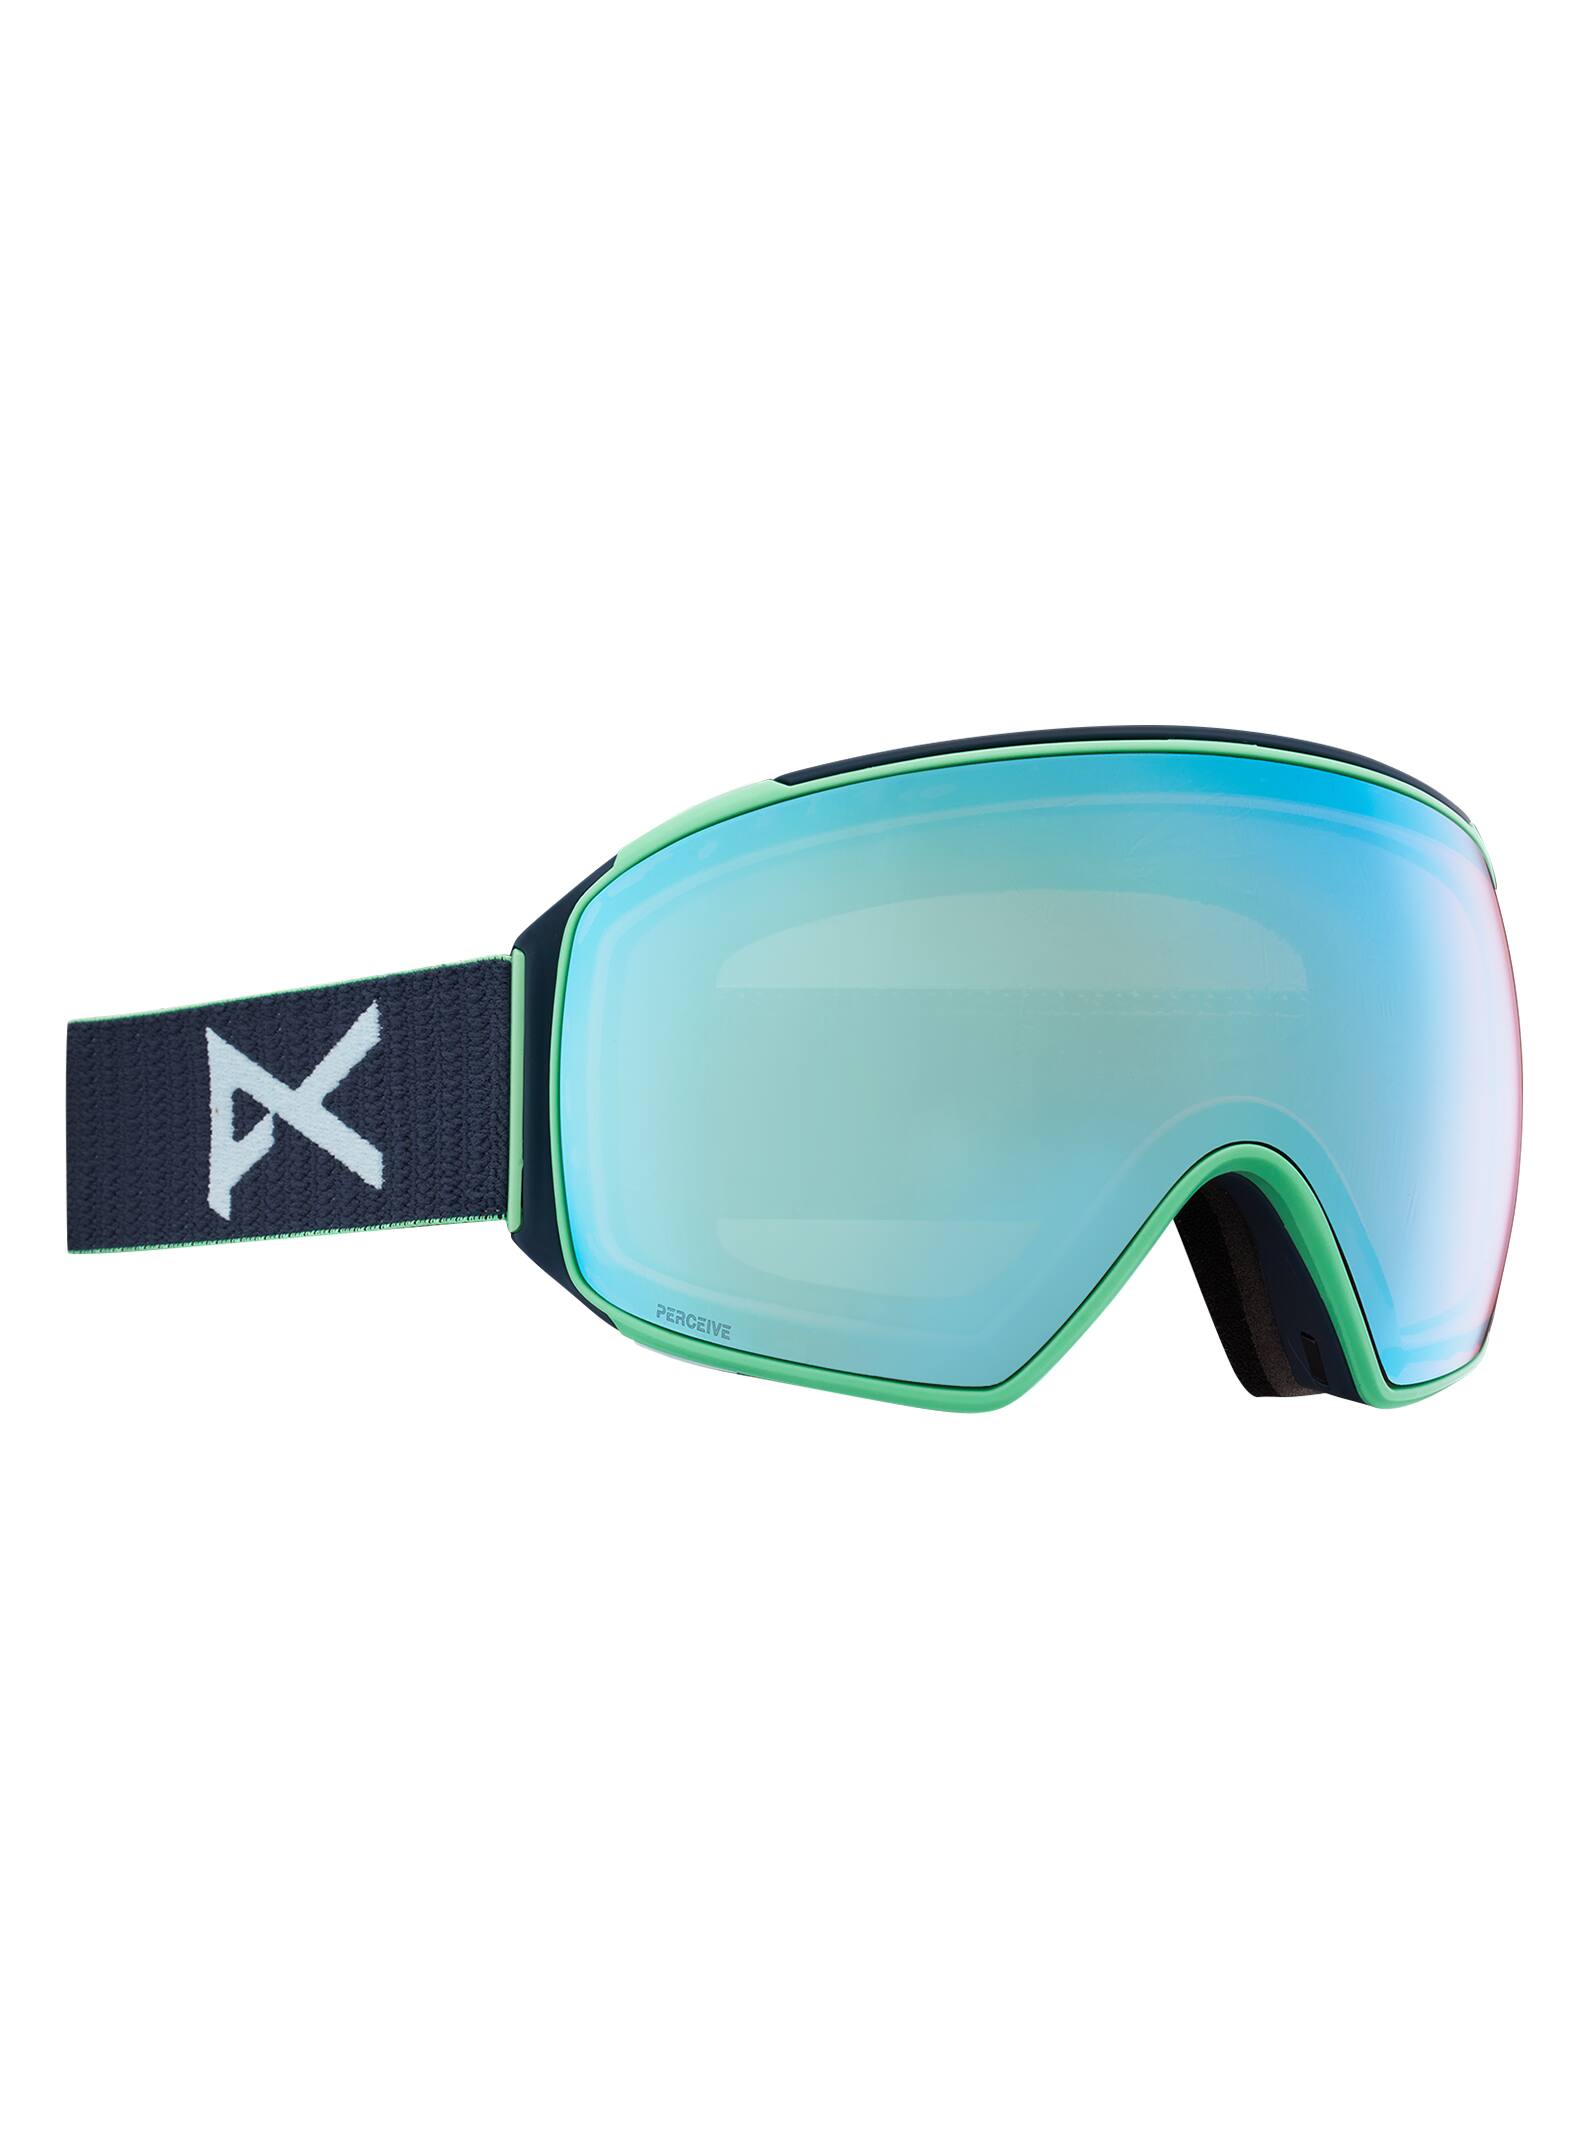 Anon New Mens Sync Ski/Snowboard Goggle with Spare Lens